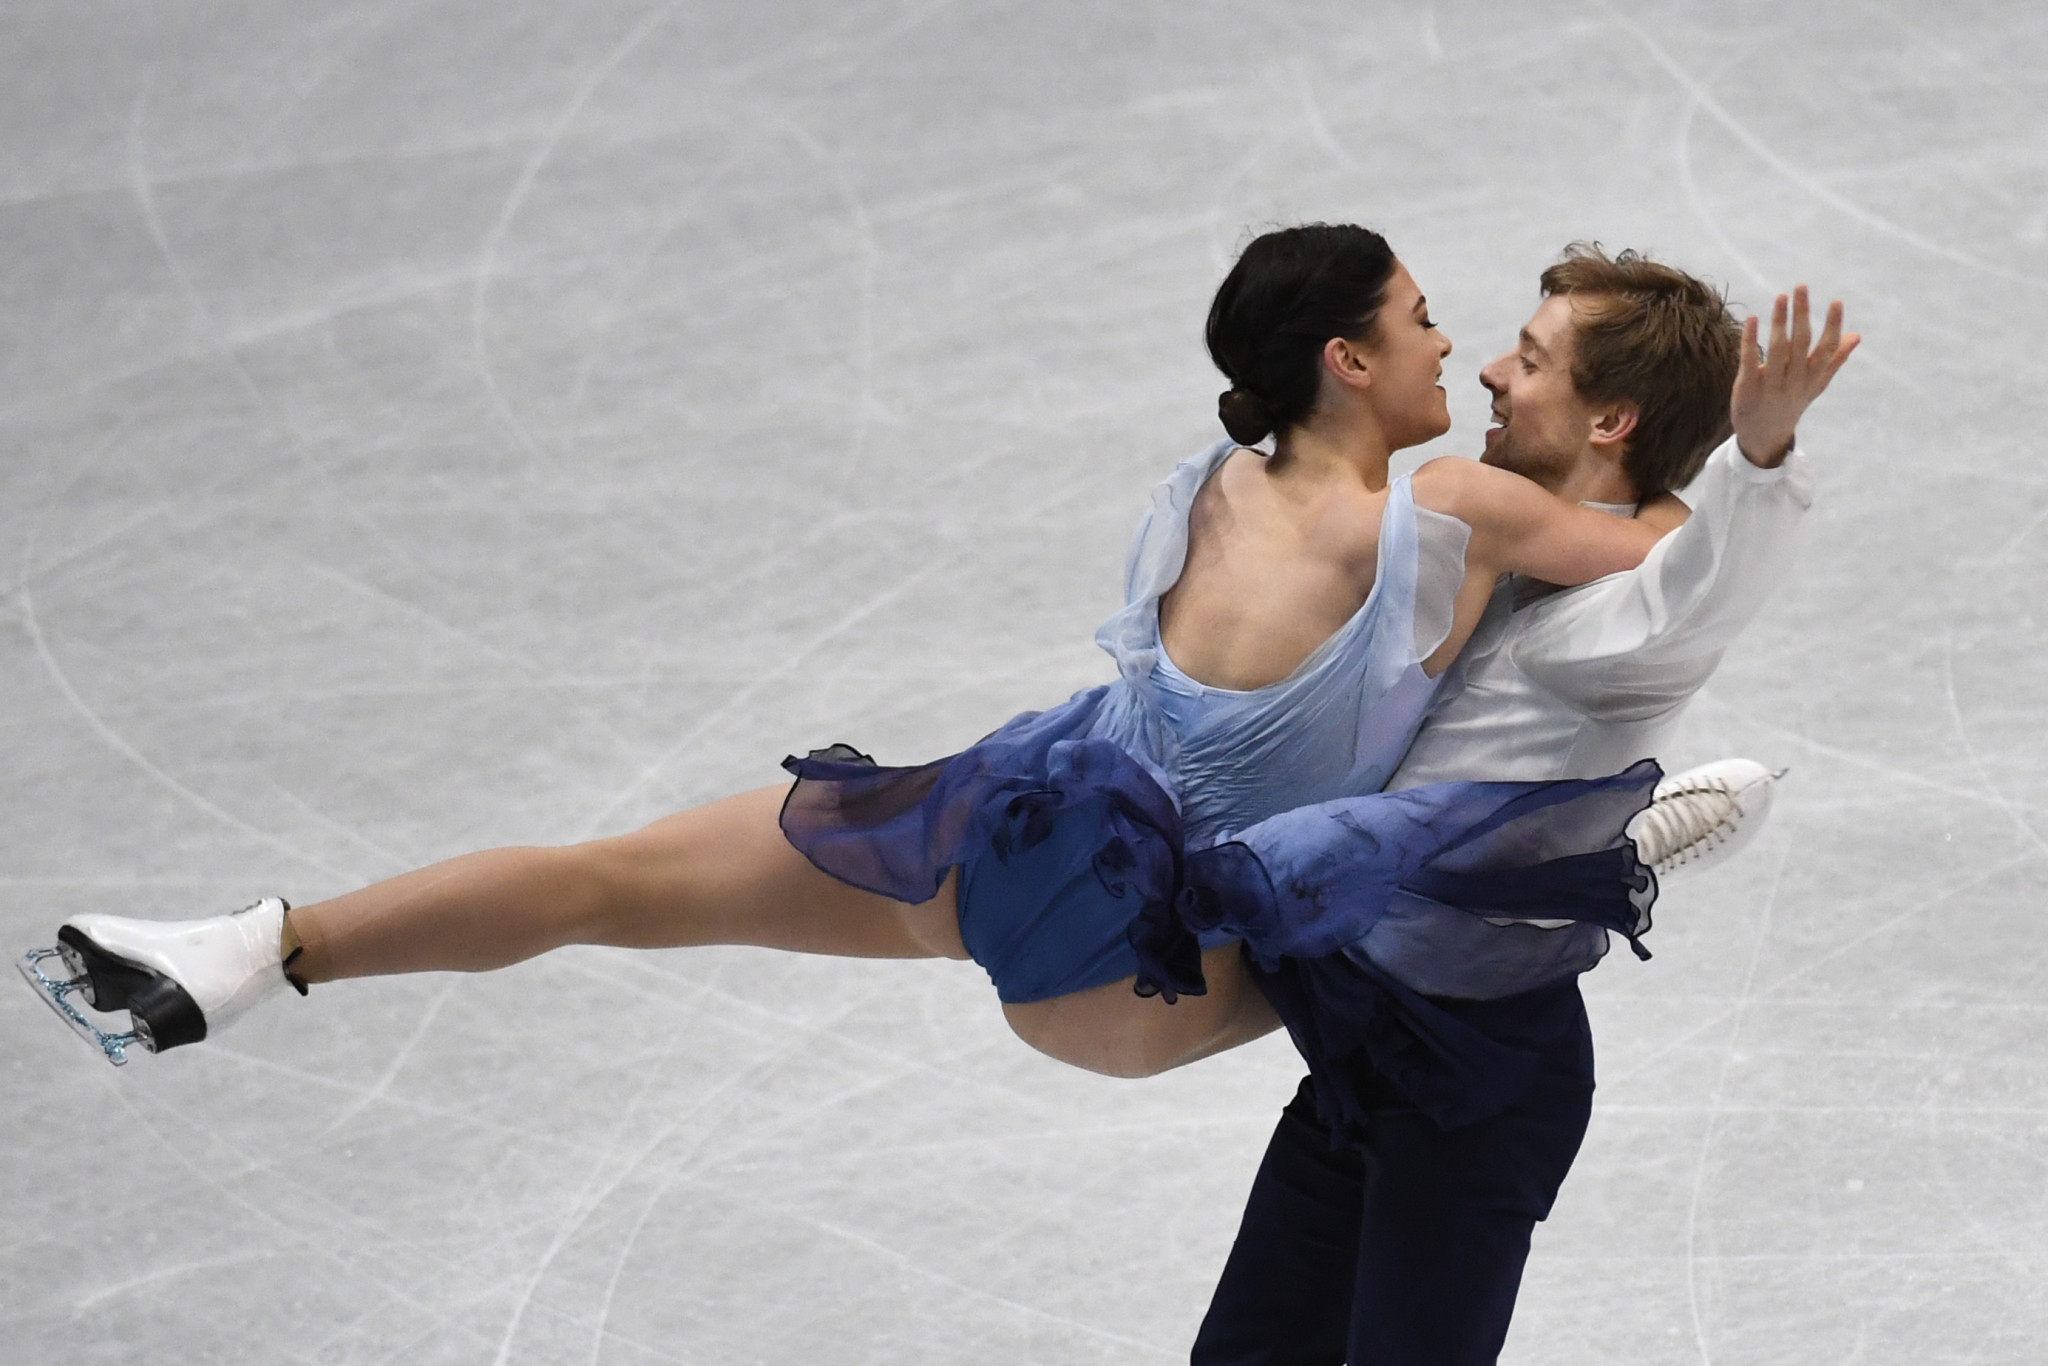 Hawayek and Baker claim ice dance gold at ISU Four Continents Figure Skating Championships